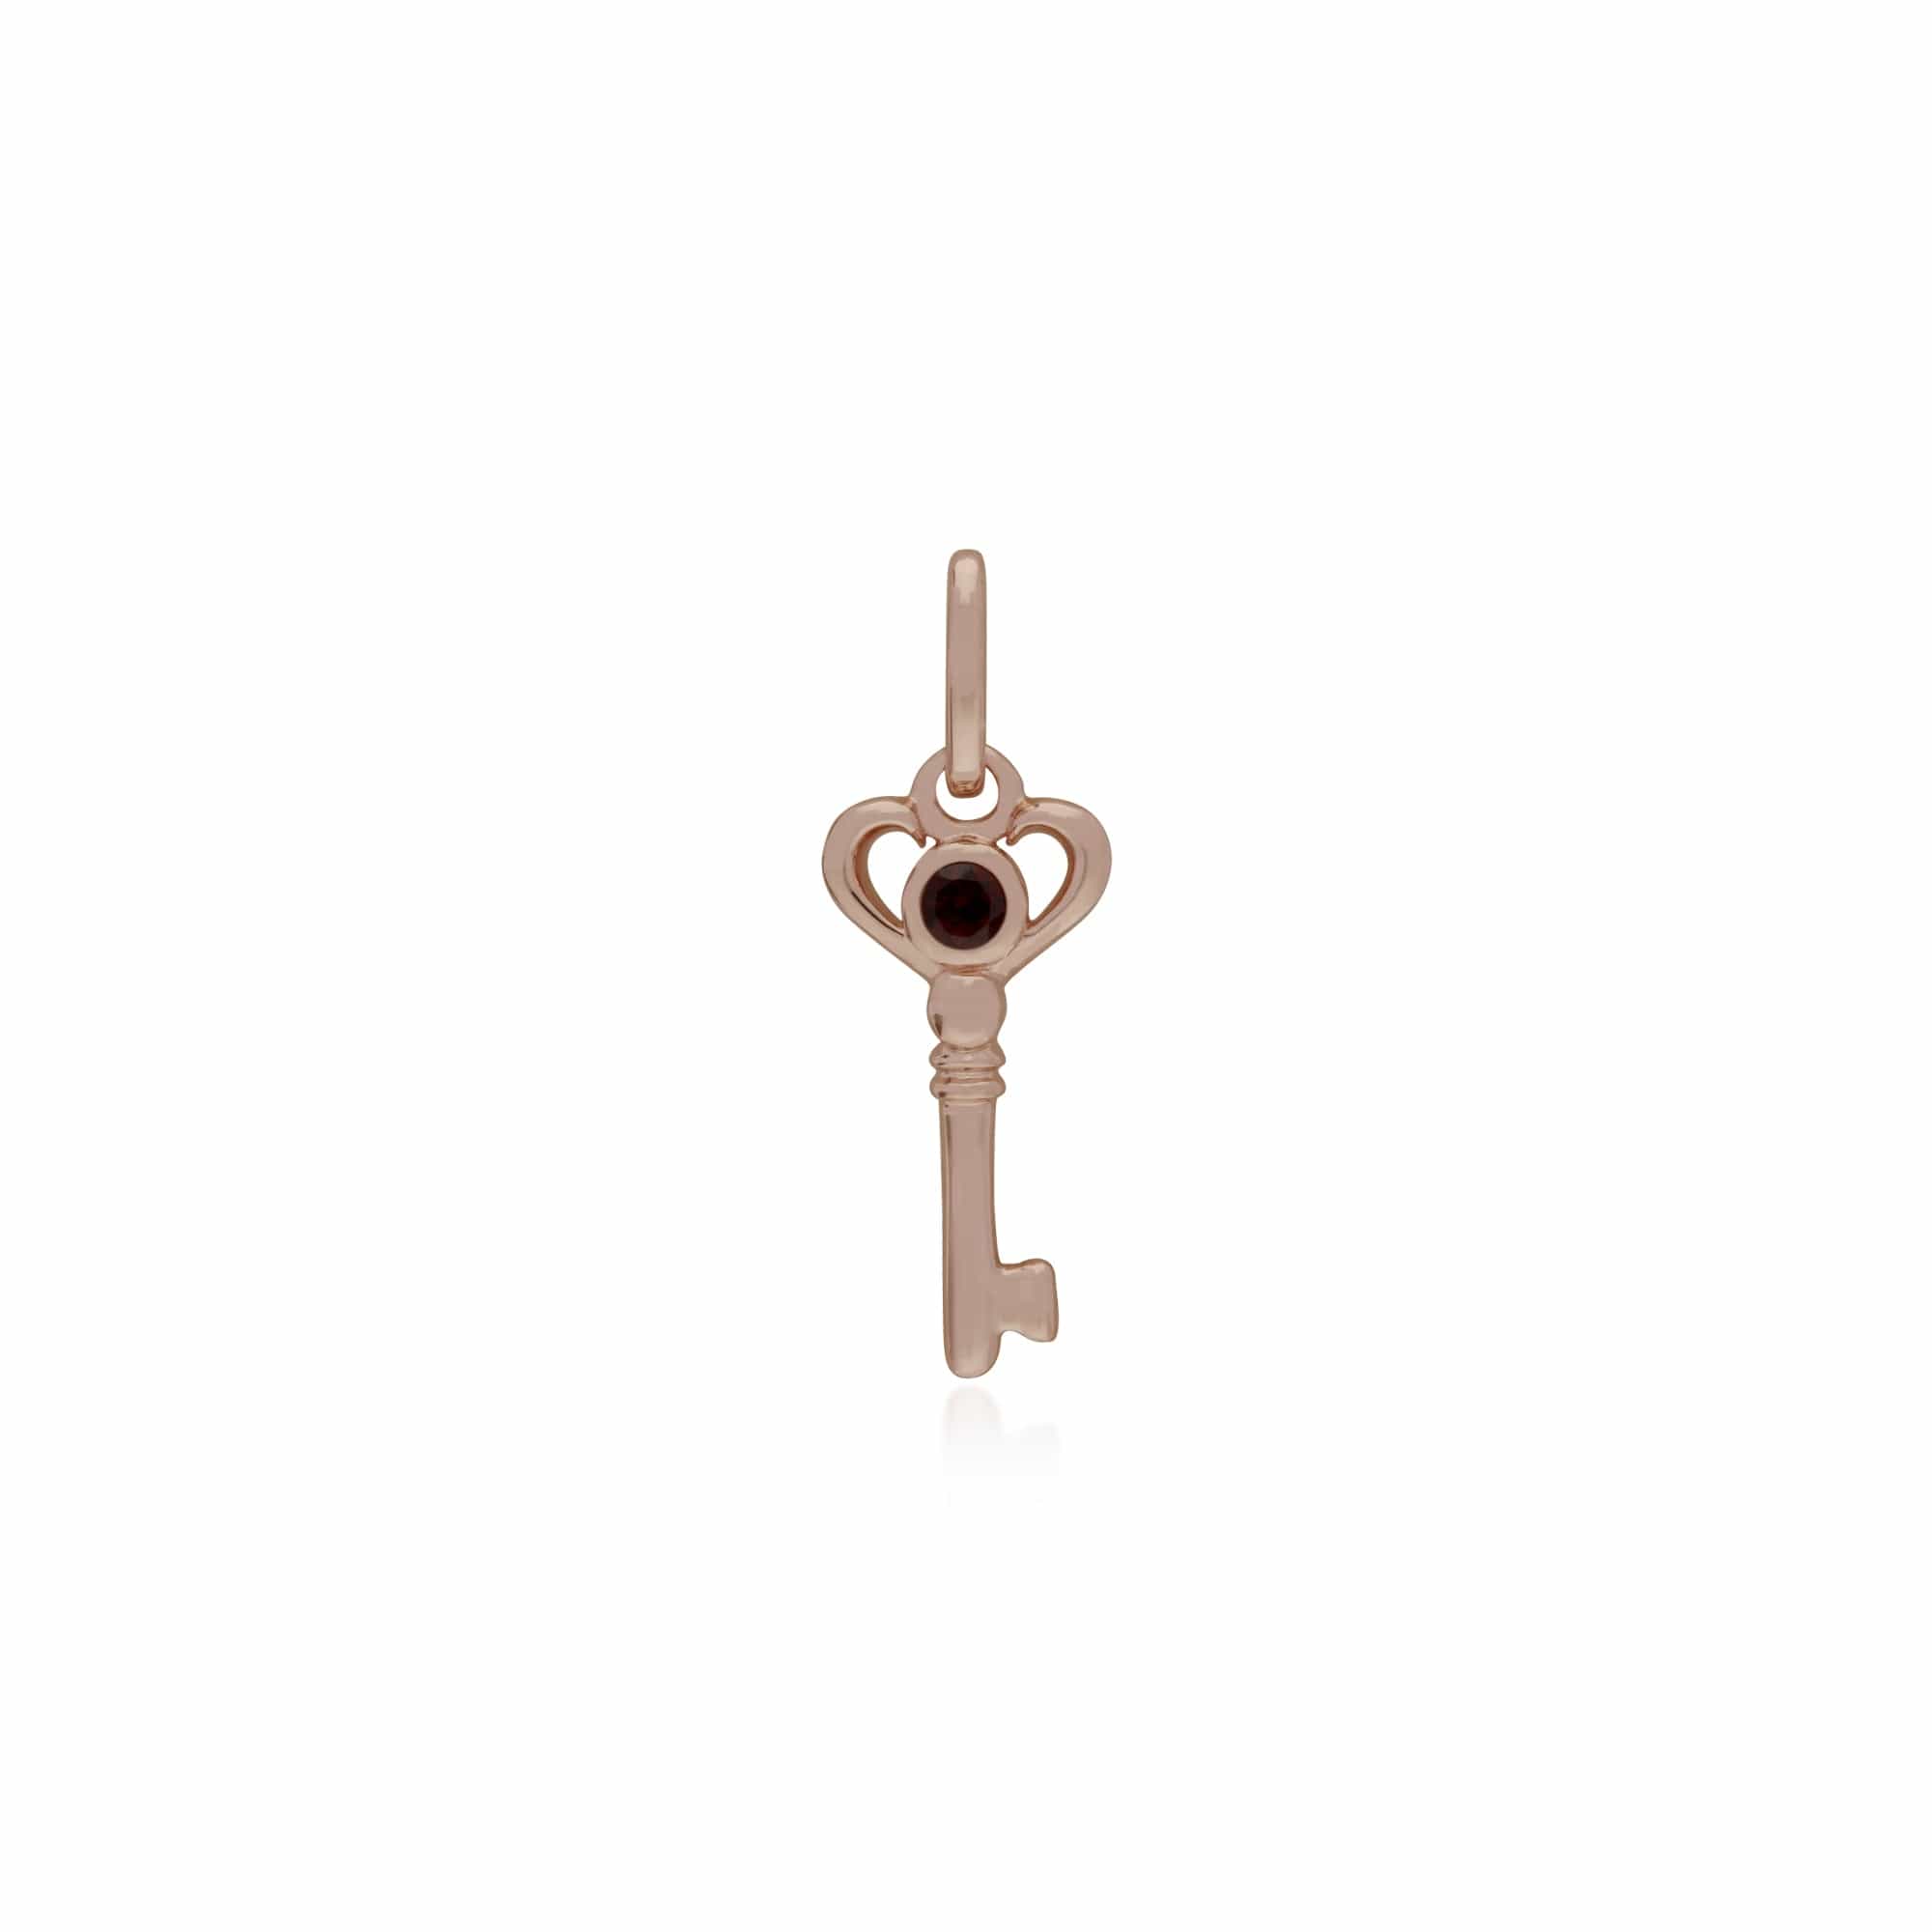 270P026306925-270P026901925 Classic Heart Lock Pendant & Garnet Key Charm in Rose Gold Plated 925 Sterling Silver 2